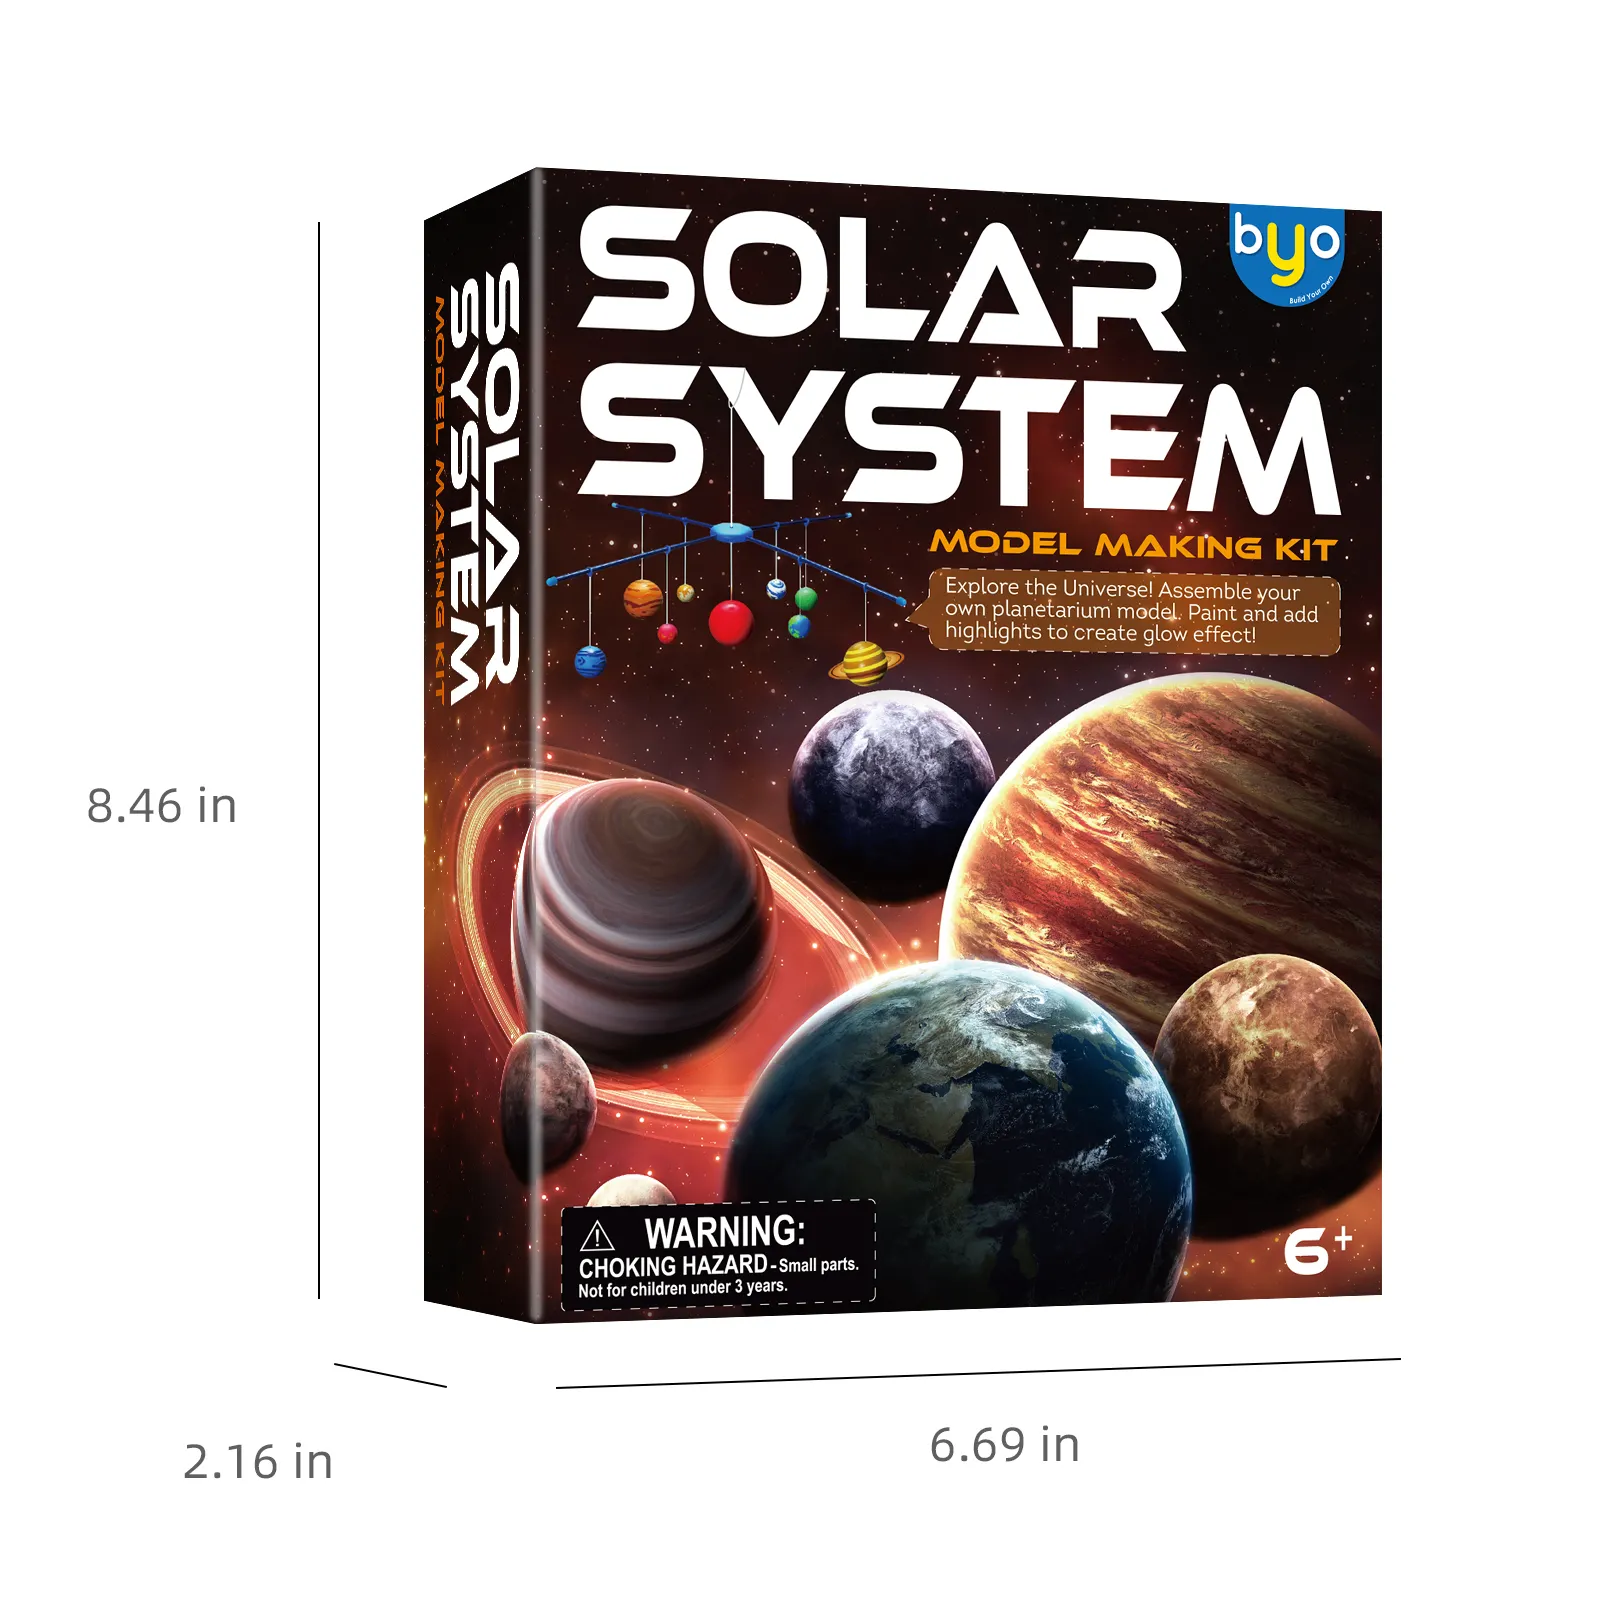 Planets Planet Children Toy Educational 2021 Best Selling Solar System Planets Model Children DIY Educational Toys Assemble Planet Toys For Kids Educational